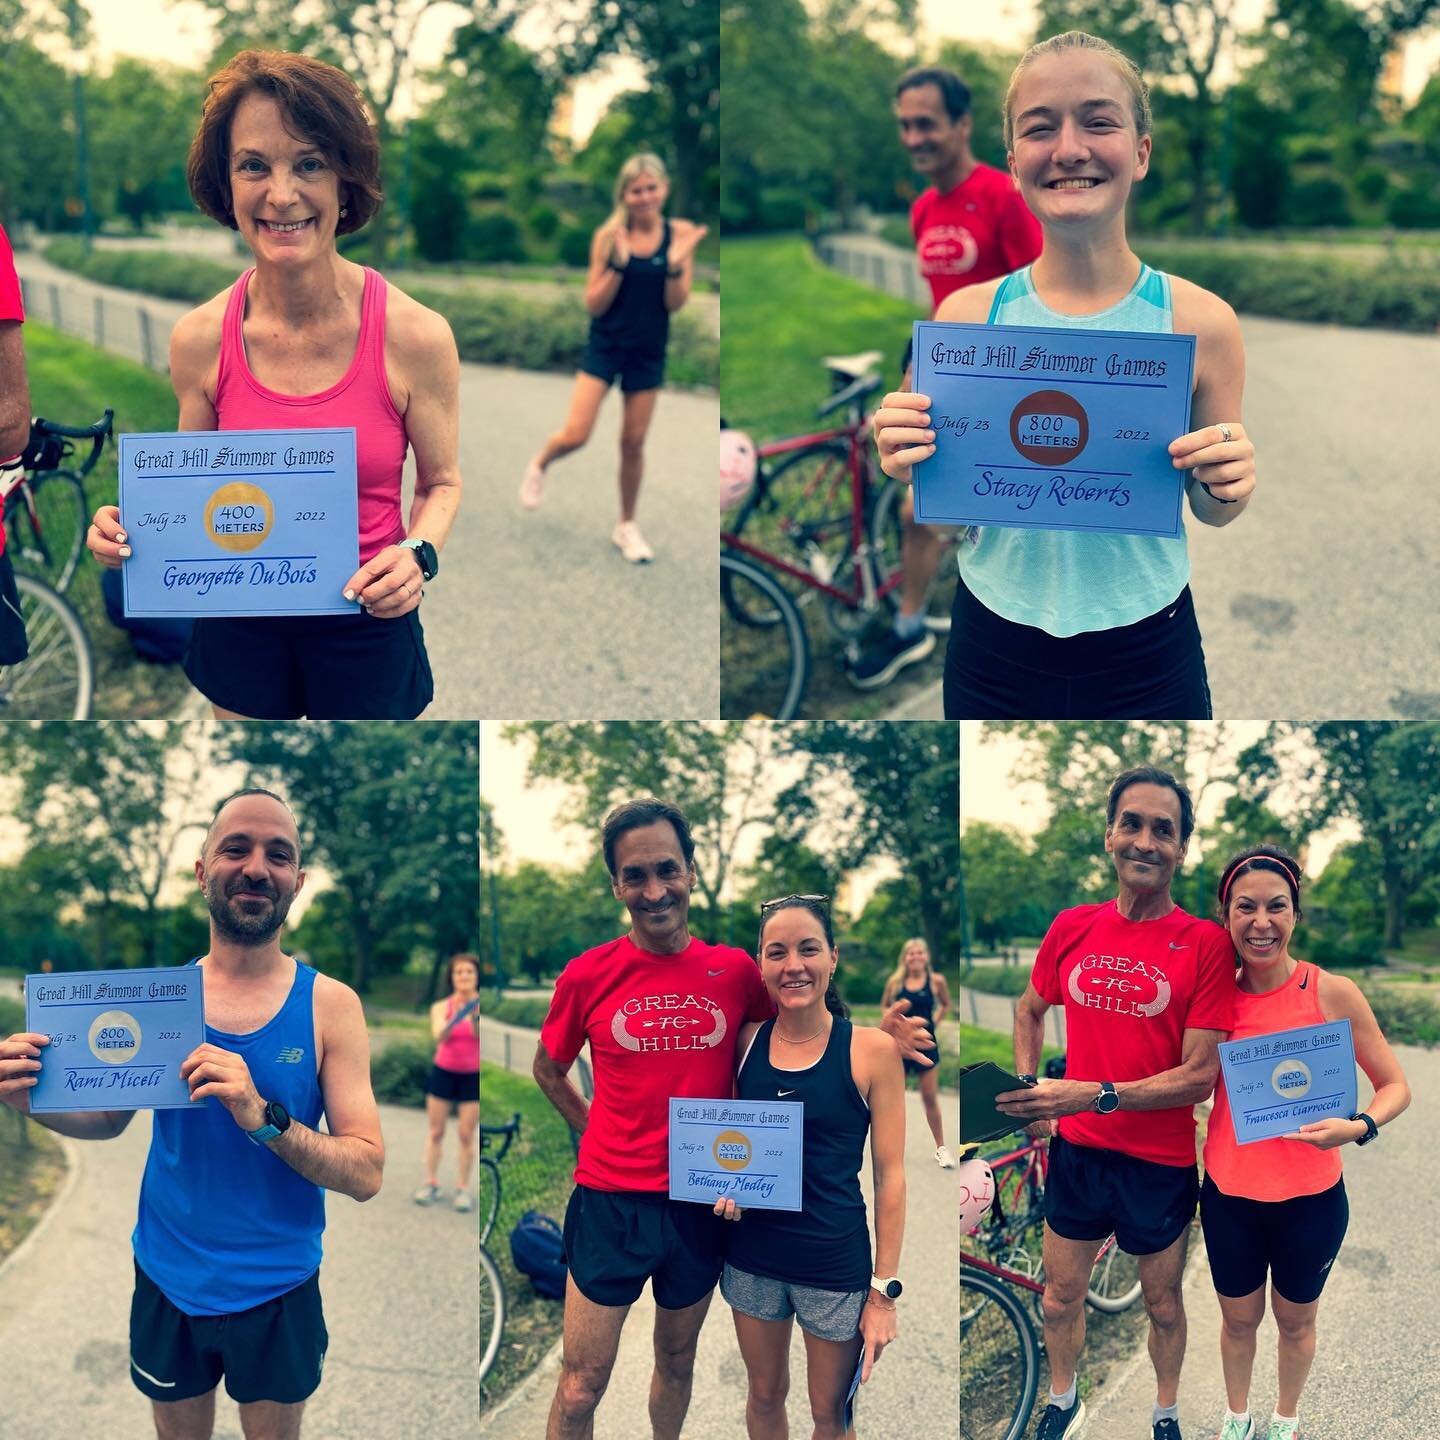 #throwback to our Great Hill TC Summer Games award ceremony!

Our second annual track meet produced some breakthroughs and continued some dynasties.&nbsp; As in 2021, the quietest team member roared the loudest: Georgette DuBois took another double-g